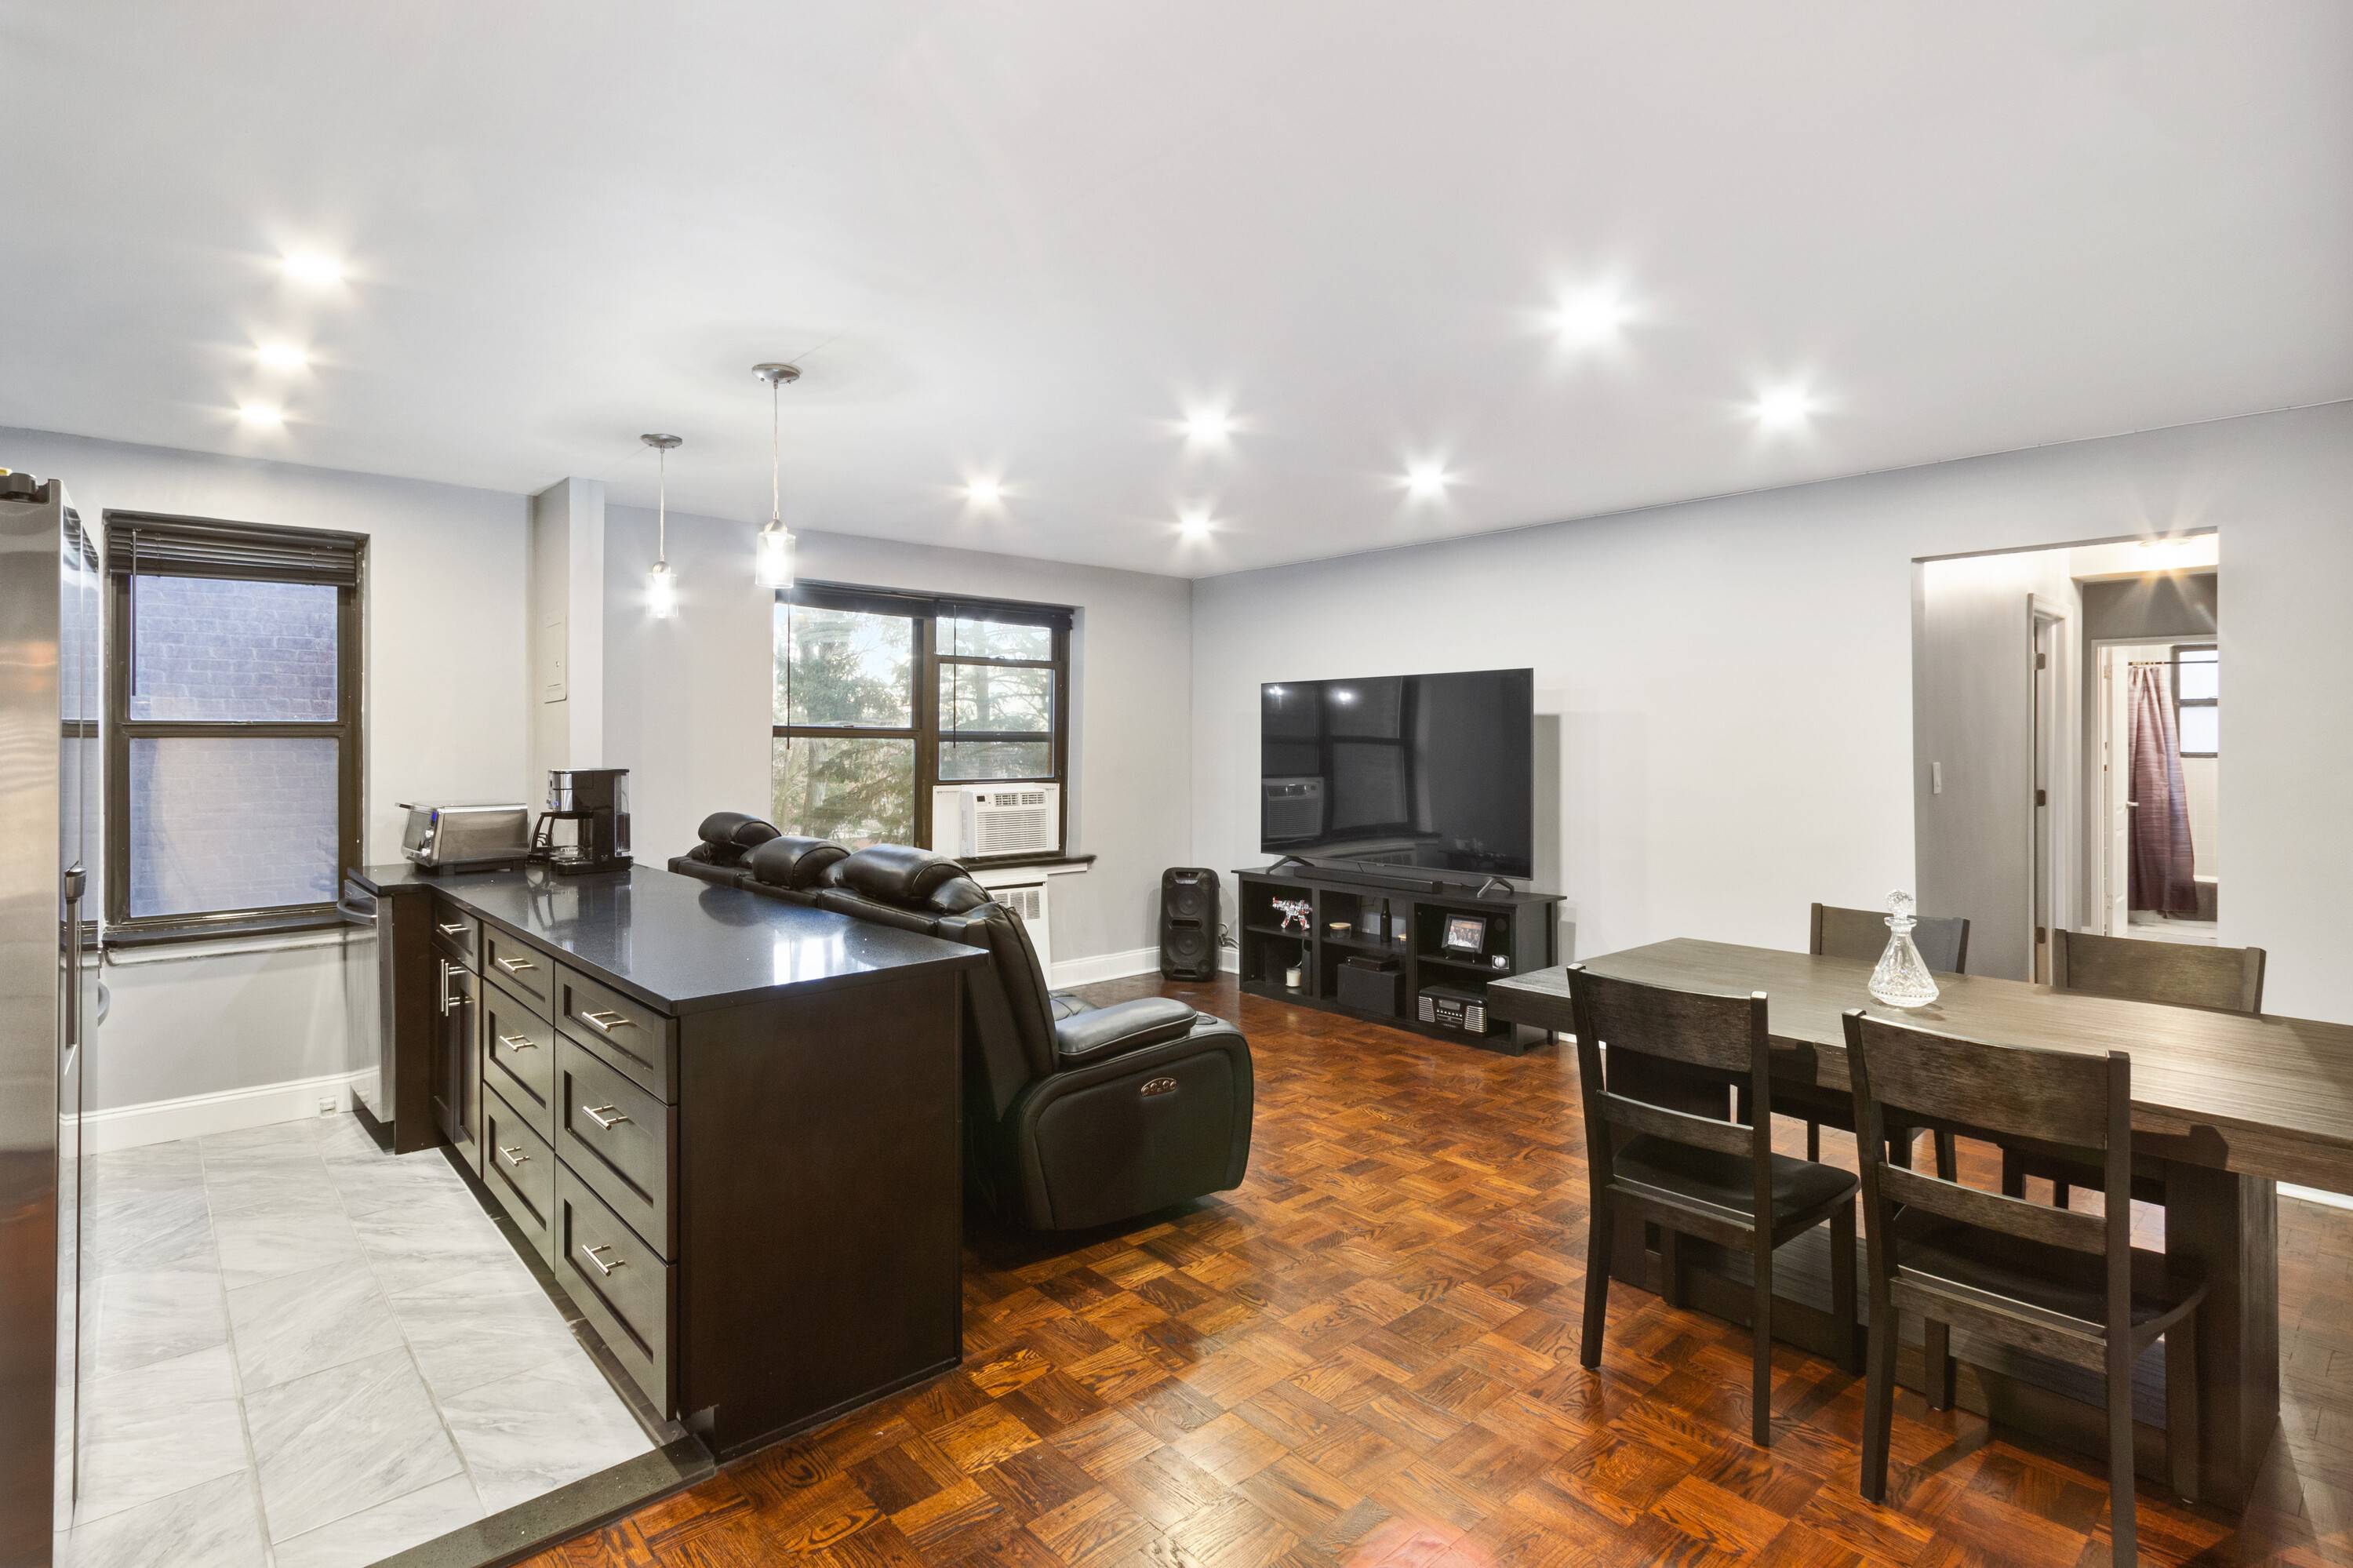 Beautiful Gut Renovated Co-op asking under $500k in the heart of Queens, New York